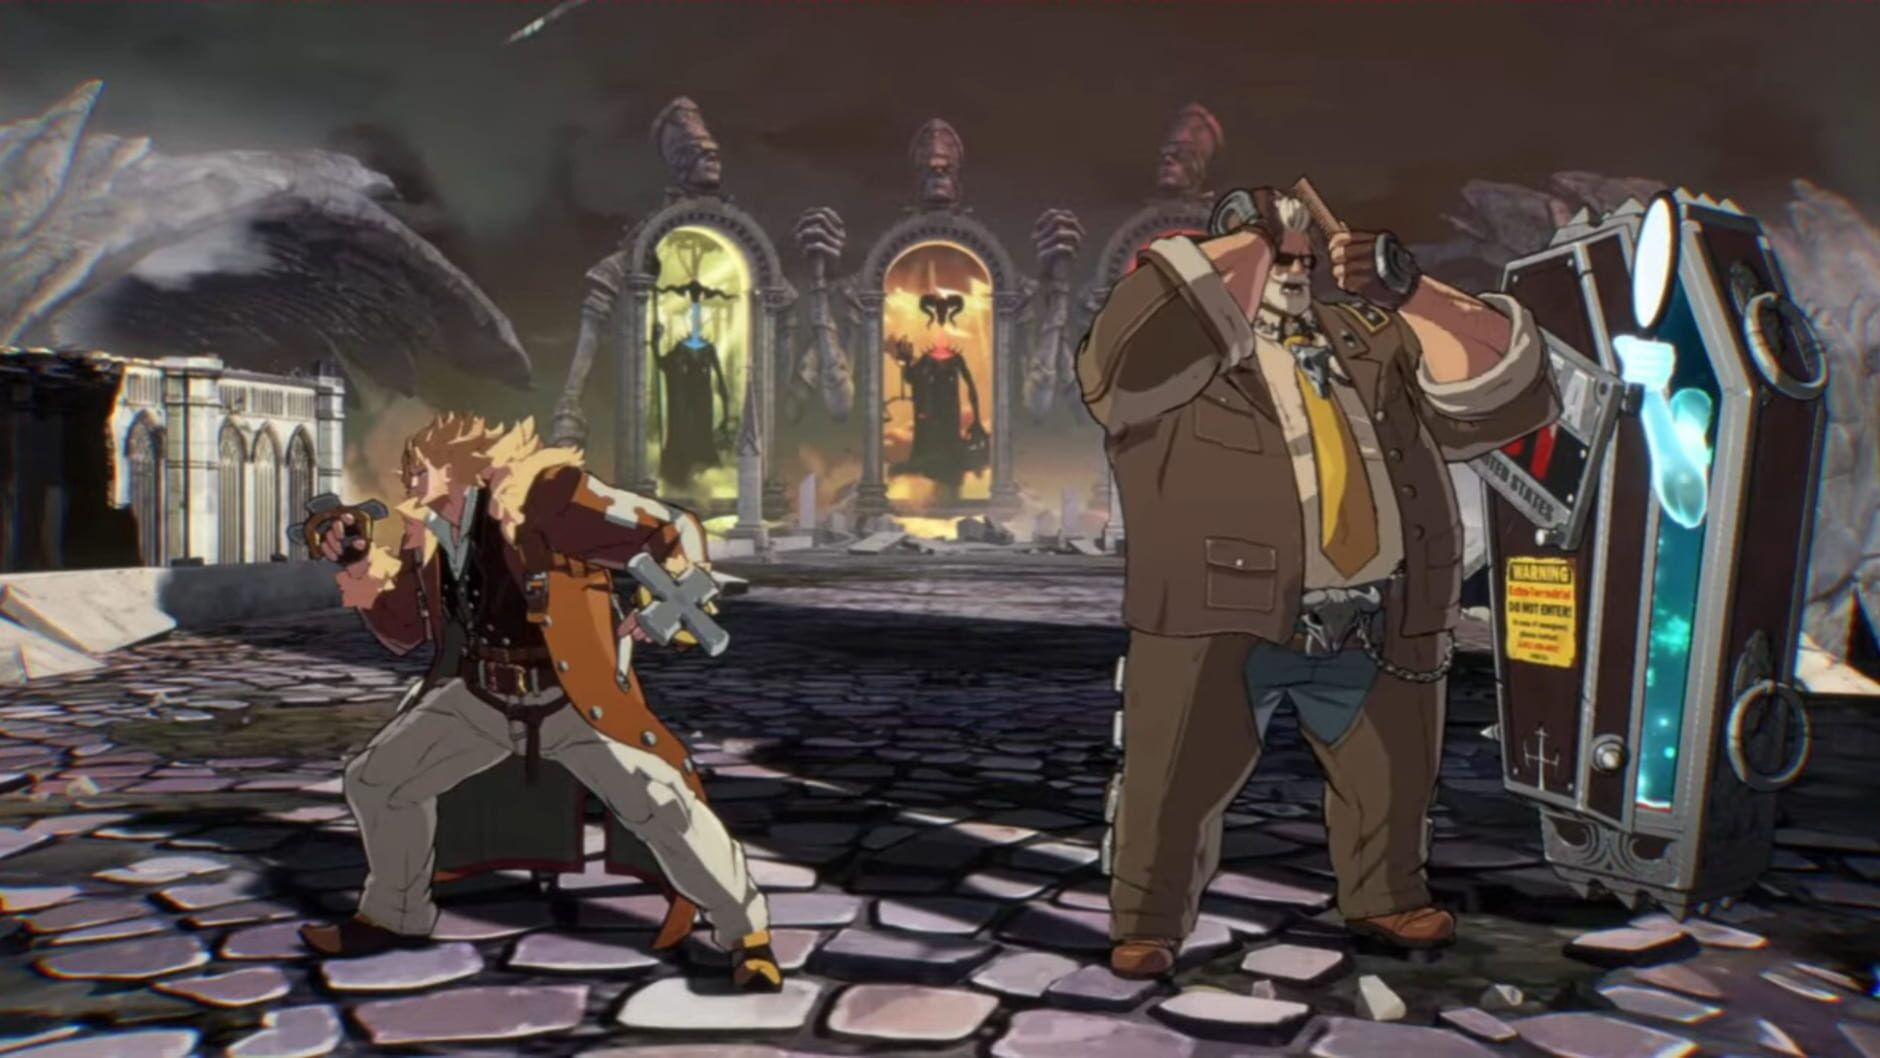 Screenshot for Guilty Gear: Strive - Additional Character 1: Goldlewis Dickinson